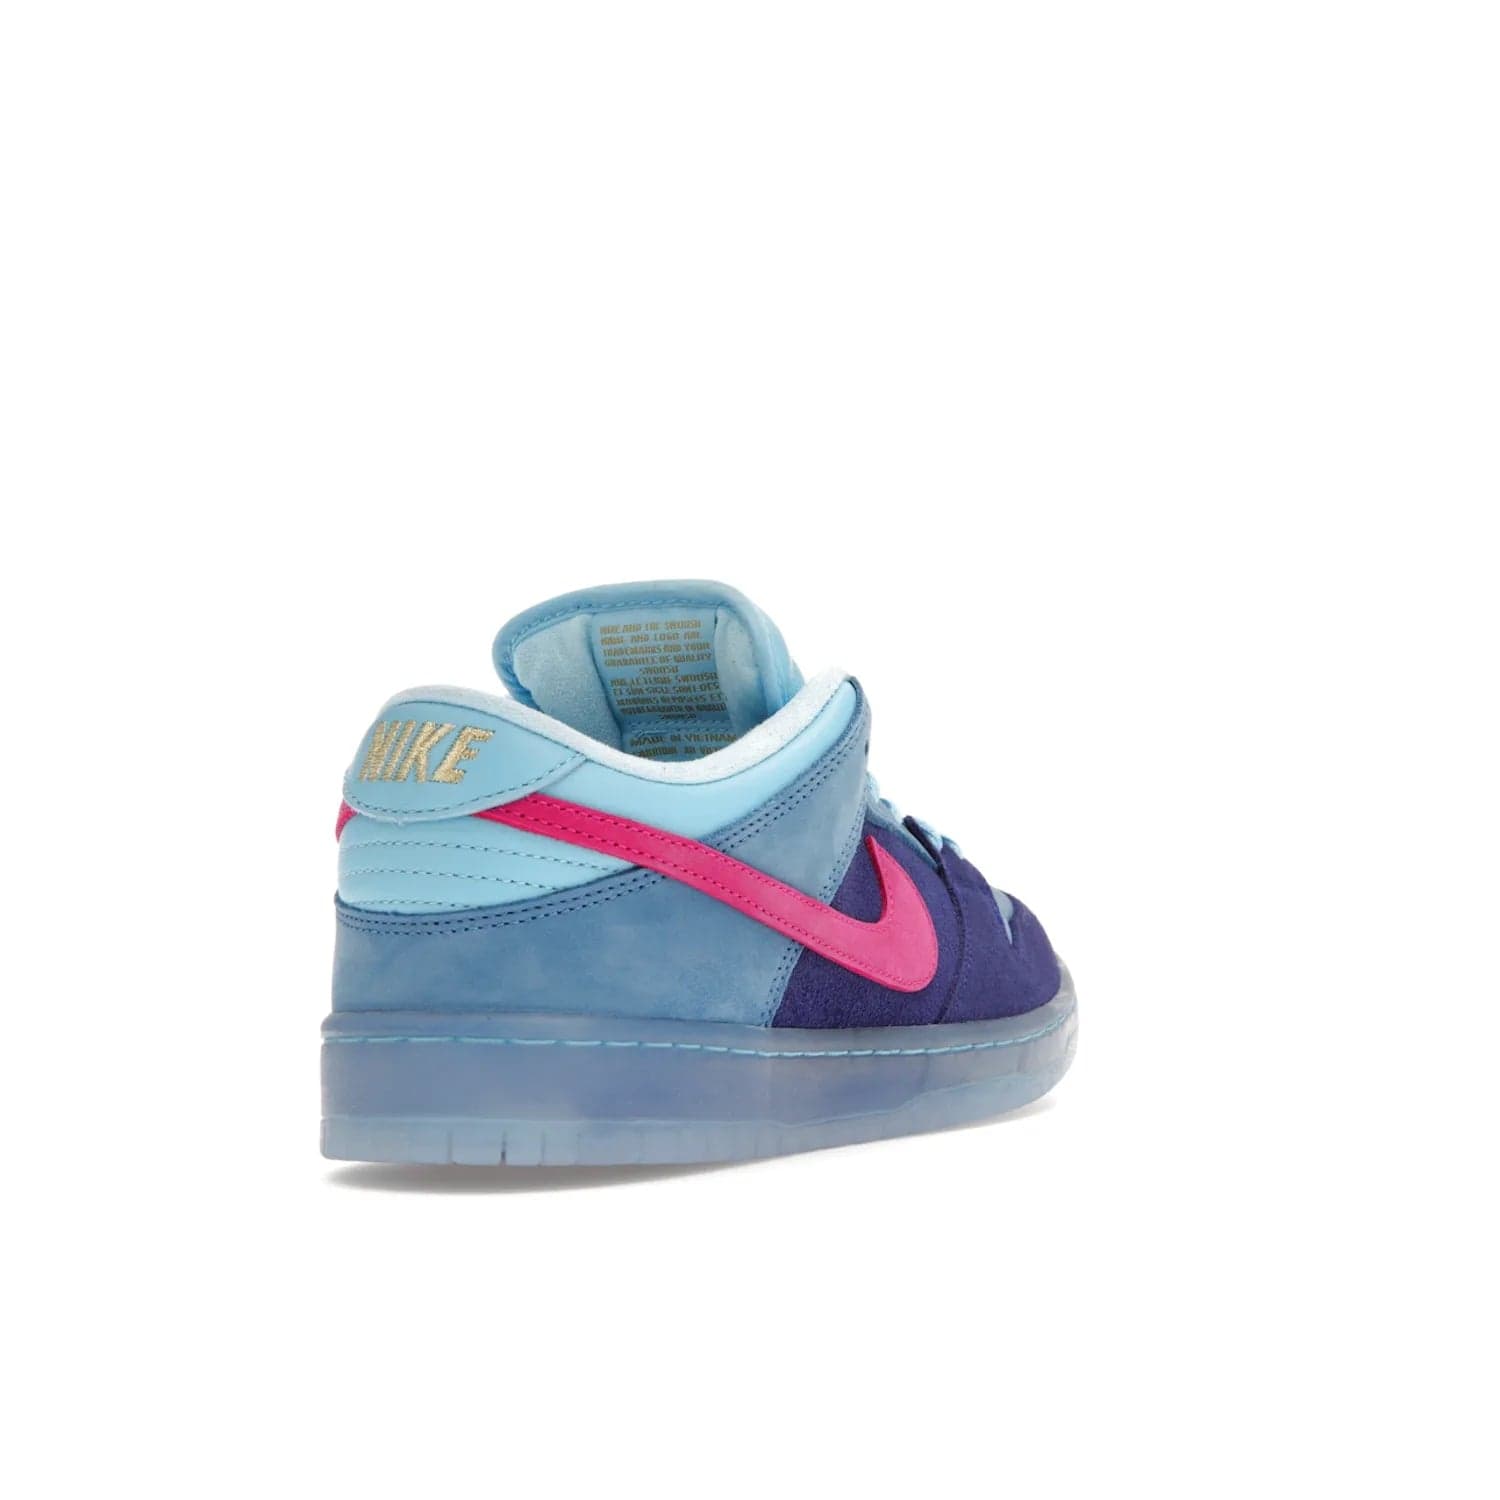 Nike SB Dunk Low Run The Jewels - Image 31 - Only at www.BallersClubKickz.com - The Nike SB Dunk Low Run The Jewels pays tribute to the Run the Jewels 3 album cover. It features a blue suede upper with pink suede accents, gold branding and 3 lace sets. RTJ insoles complete this limited edition sneaker. Get it now for your shoe collection.